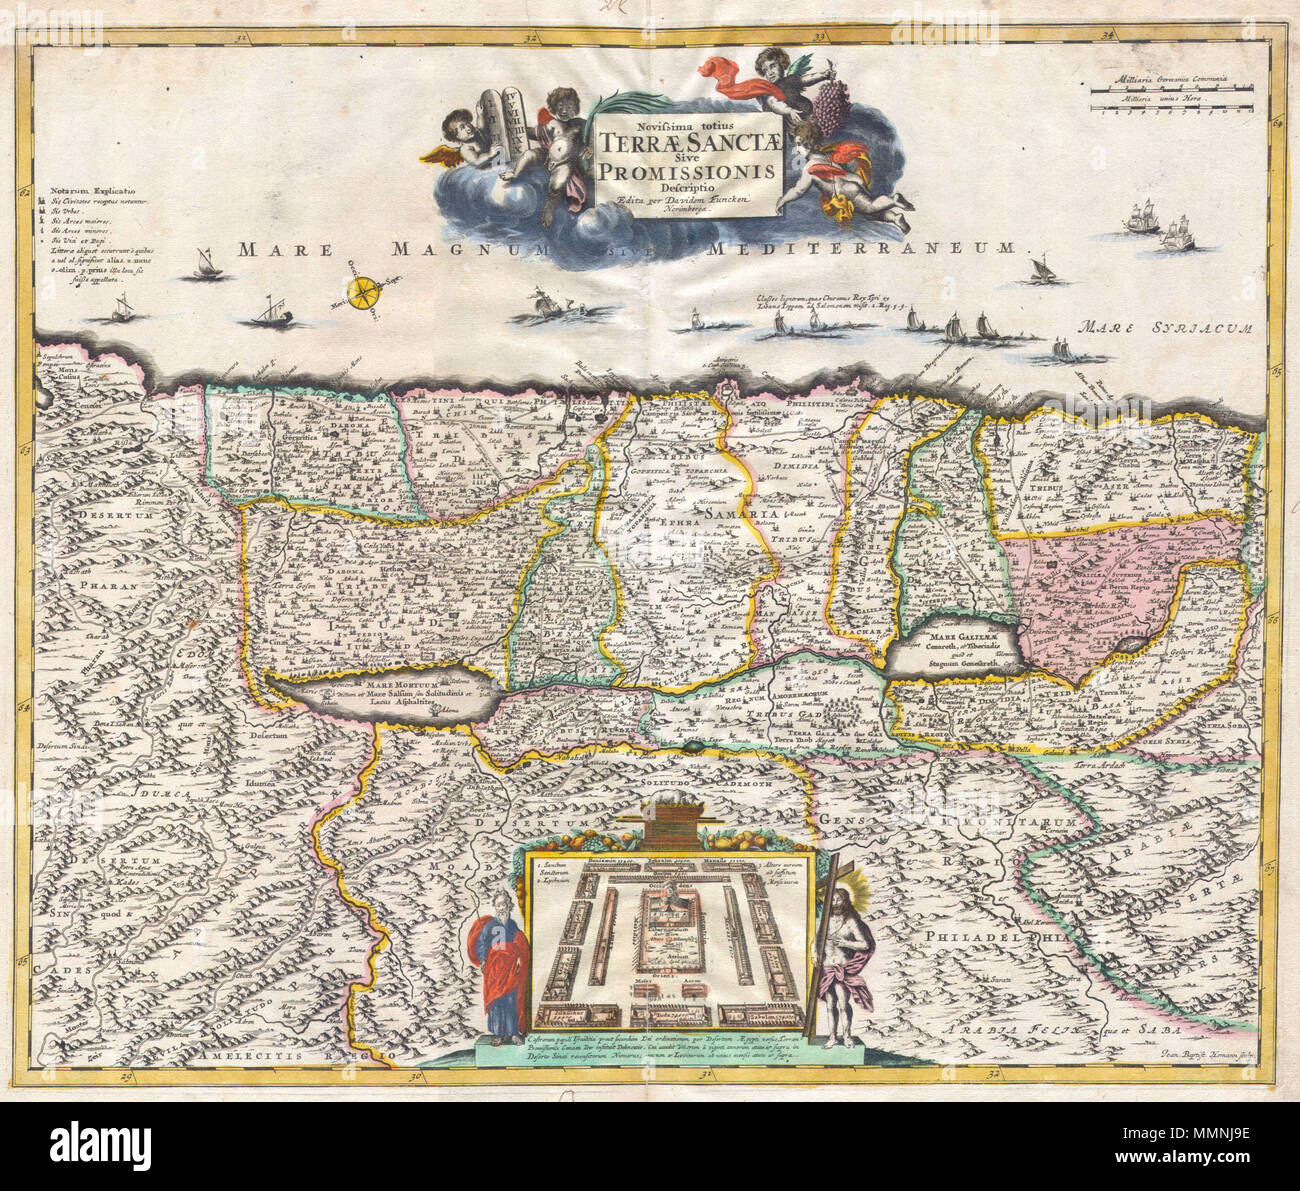 .  English: An altogether stunning map of the Israel, Palestine, or the Holy Land. Issued in 1720 by David Funck of Nuremburg and geographically based upon Visscher’s Map of 1659 and De Wit’s Map of 1670. The shoreline runs from Sidon to Egypt along an East – West orientation. Divided according to the Tribes of Israel on both side of the River Jordan. Bottom center features a plan of the Temple of Solomon with the Ark of the Covenant featuring prominently. Moses and Jesus stand to either side of the plan. Title cartouche appears at the top of the map and features four cherubs, one of which hol Stock Photo